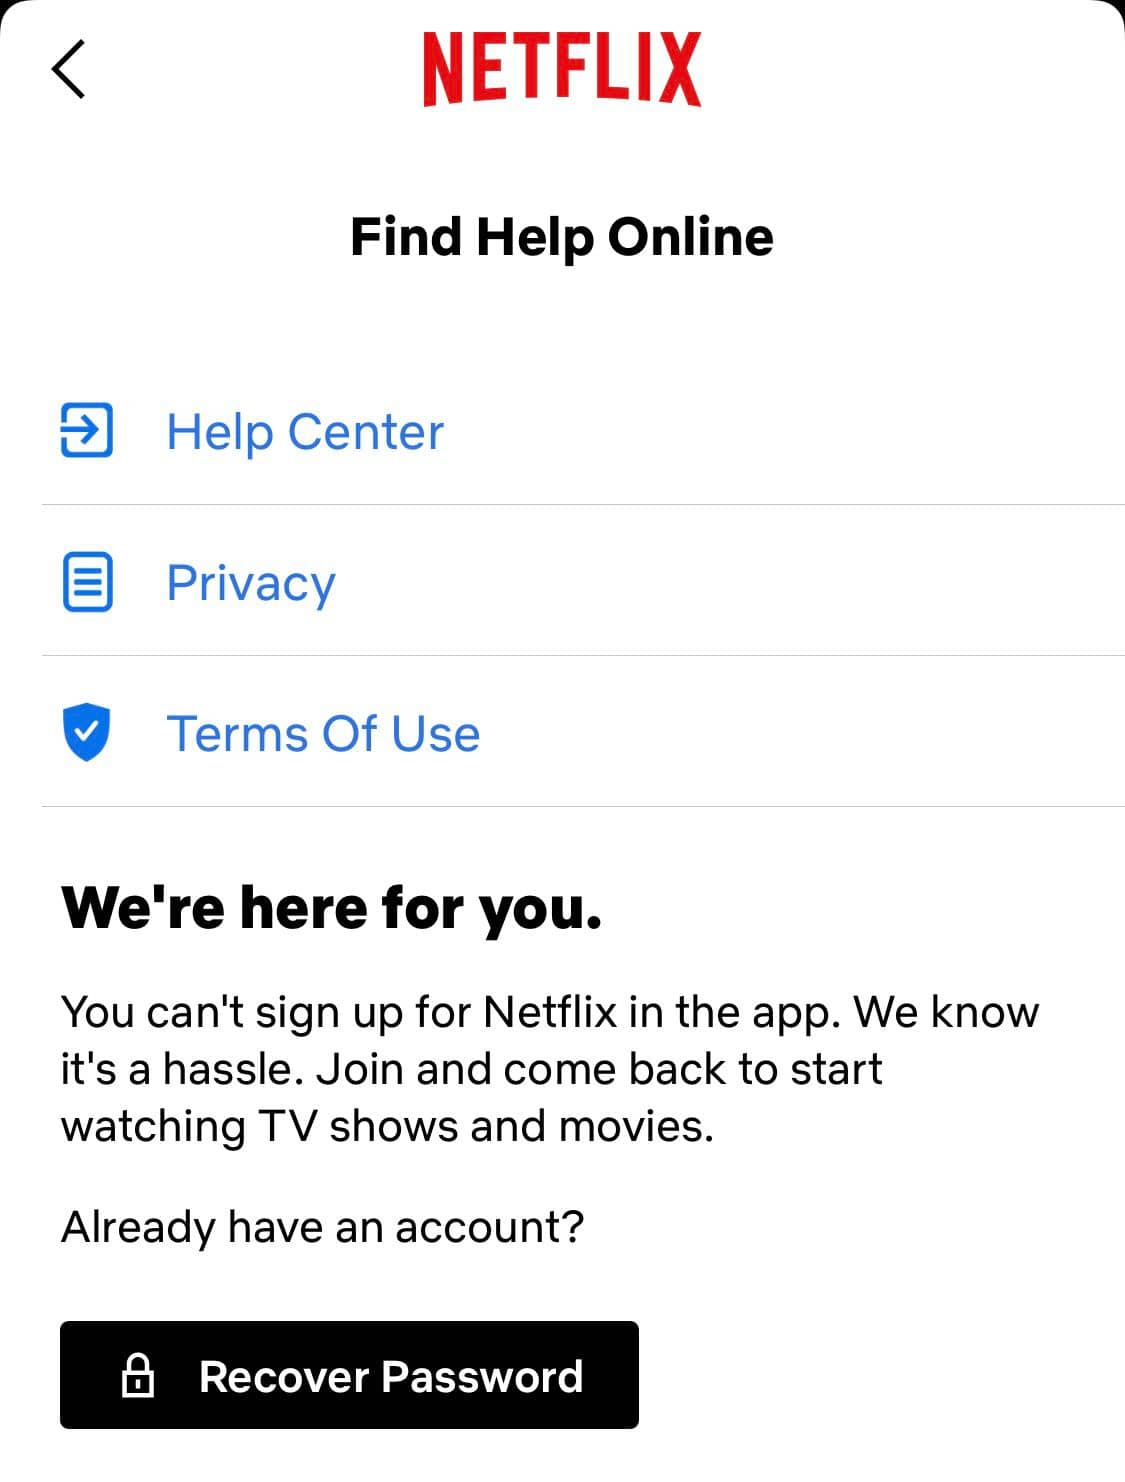 Screenshot of Netflix’s app, with the text “You can’t sign up for Netflix in the app. We know it’s a hassle. Join and come back to start watching TV shows and movies.”